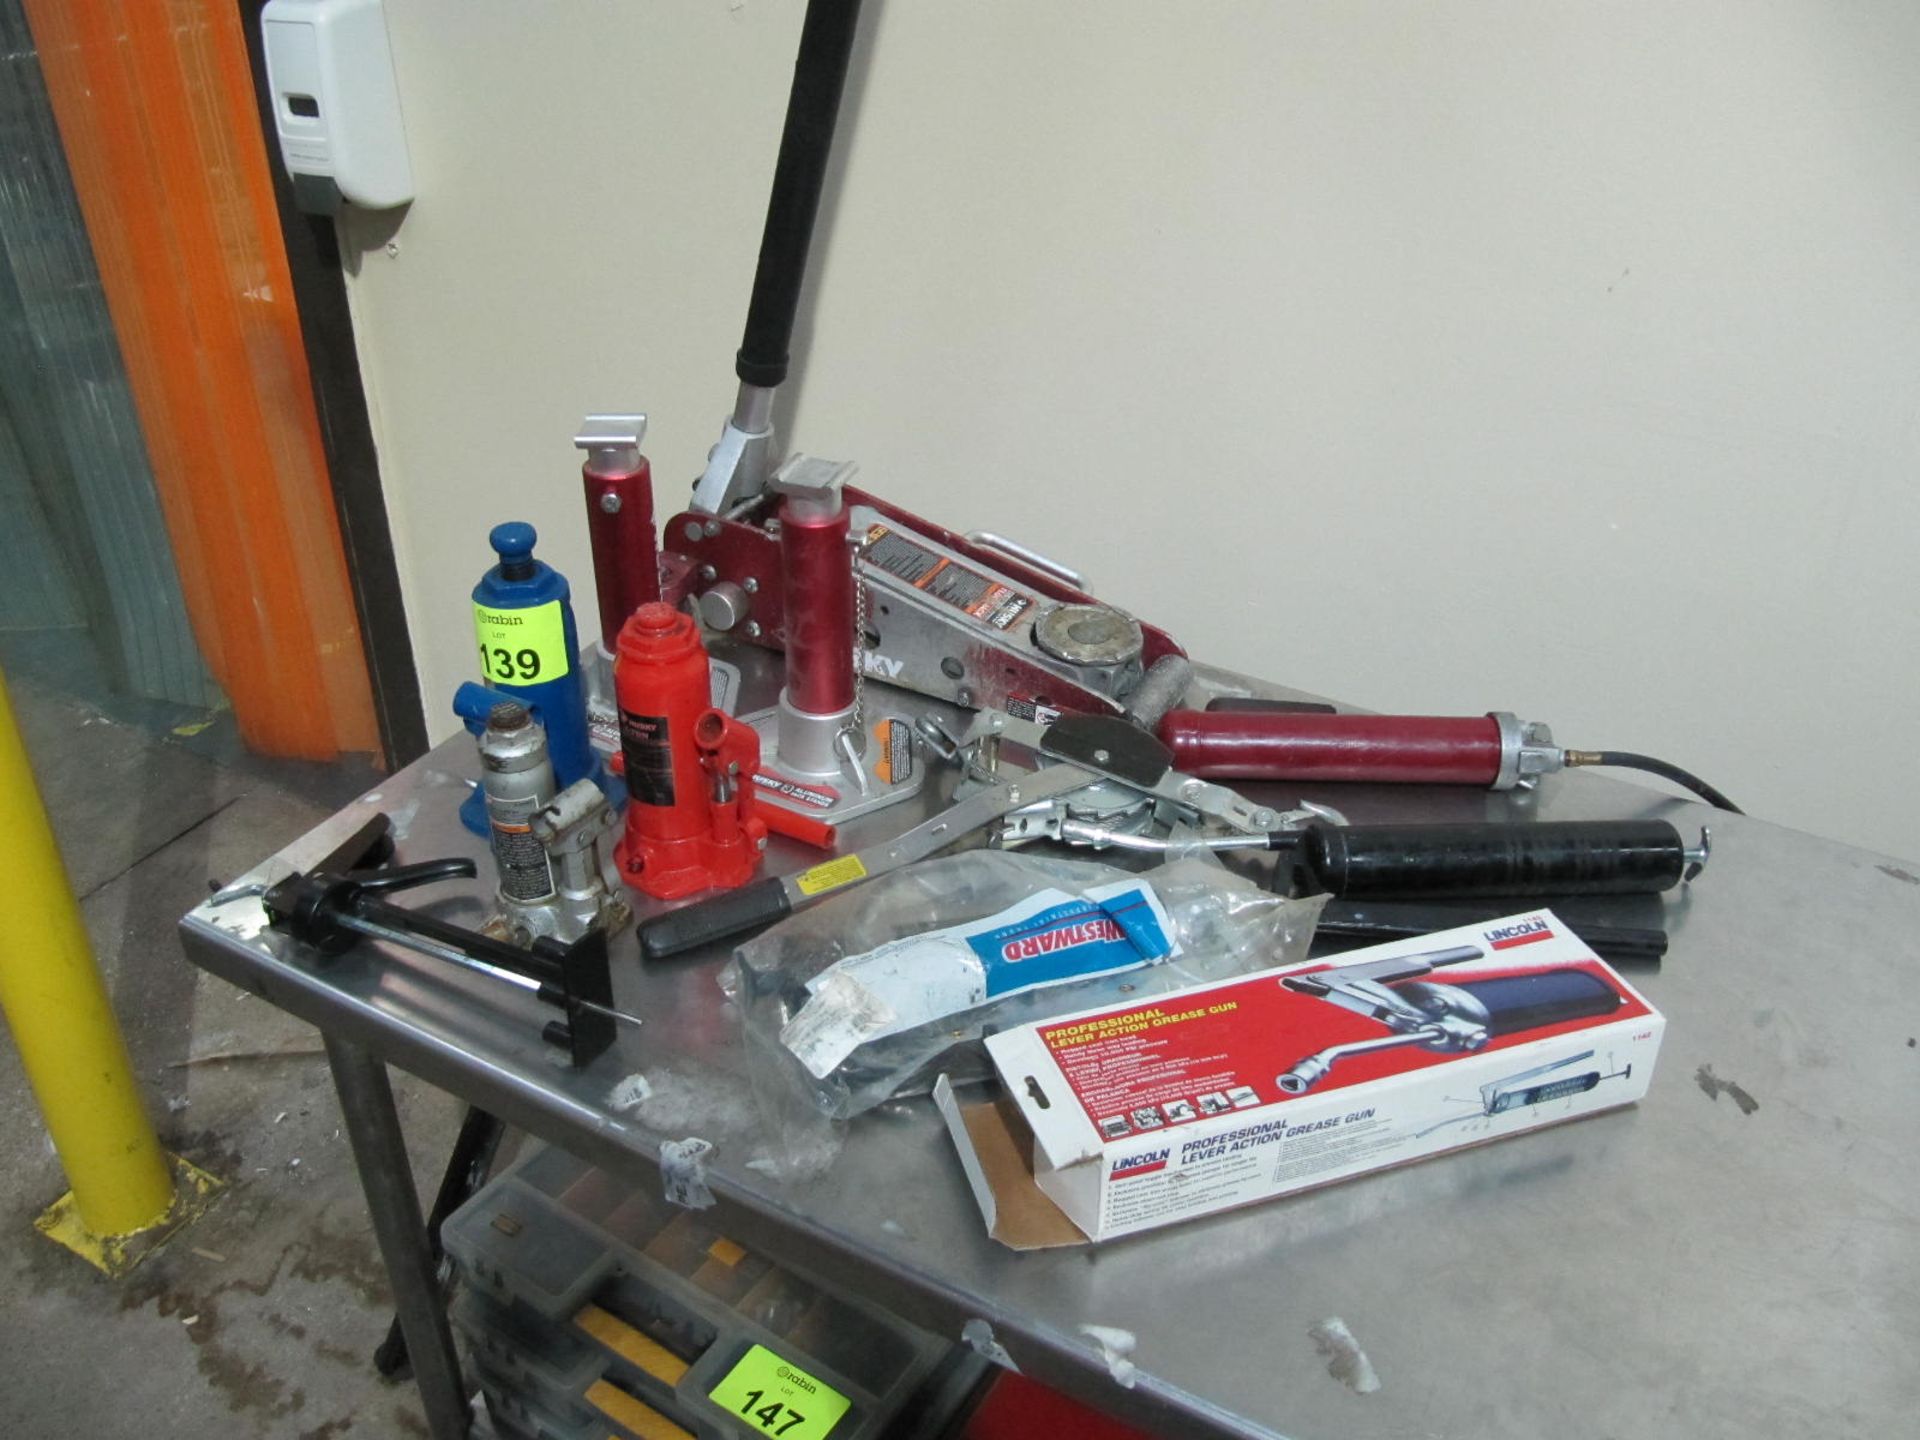 [Lot] Husky 1-1/2 ton hydraulic floor jack, Husky 3 ton jack stands, pipe stand, 8 ton and 6 ton